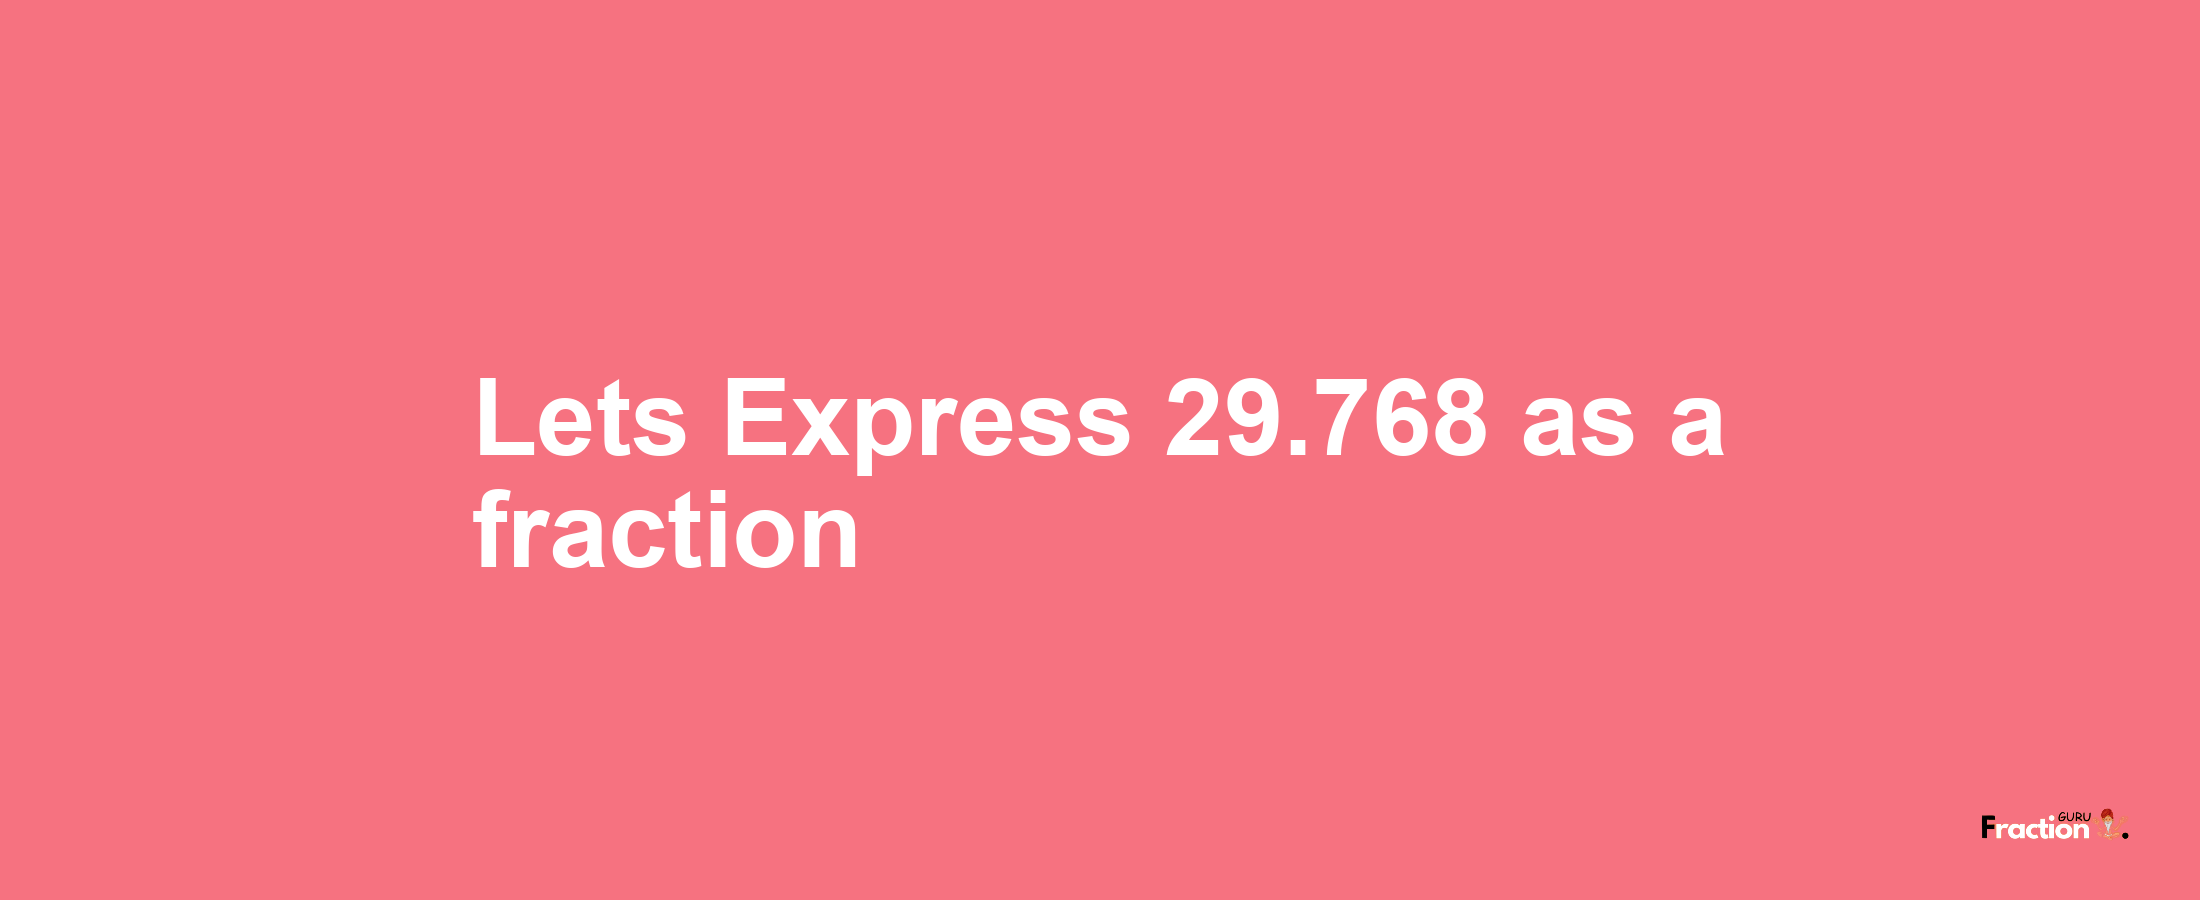 Lets Express 29.768 as afraction